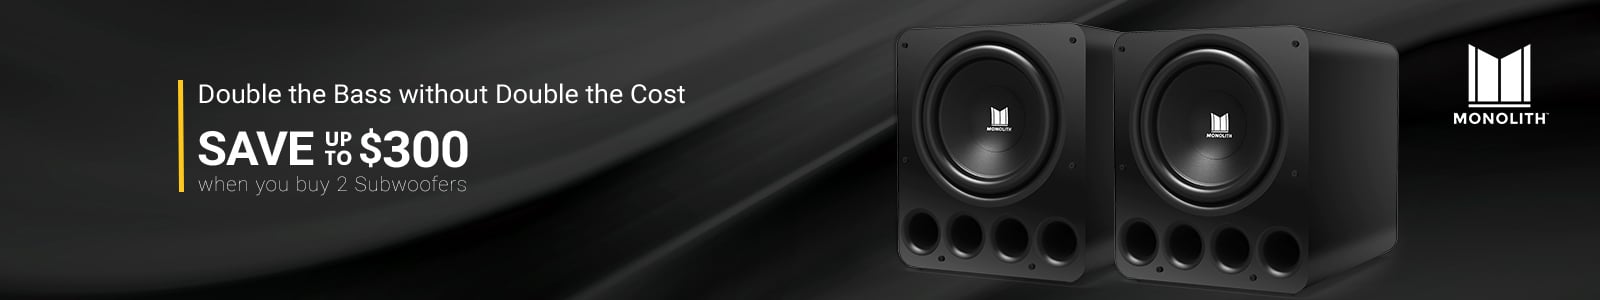 Monolith logo
Double the Bass without Double the Cost
Save up to $300
when you buy 2 Subwoofers
Shop Now